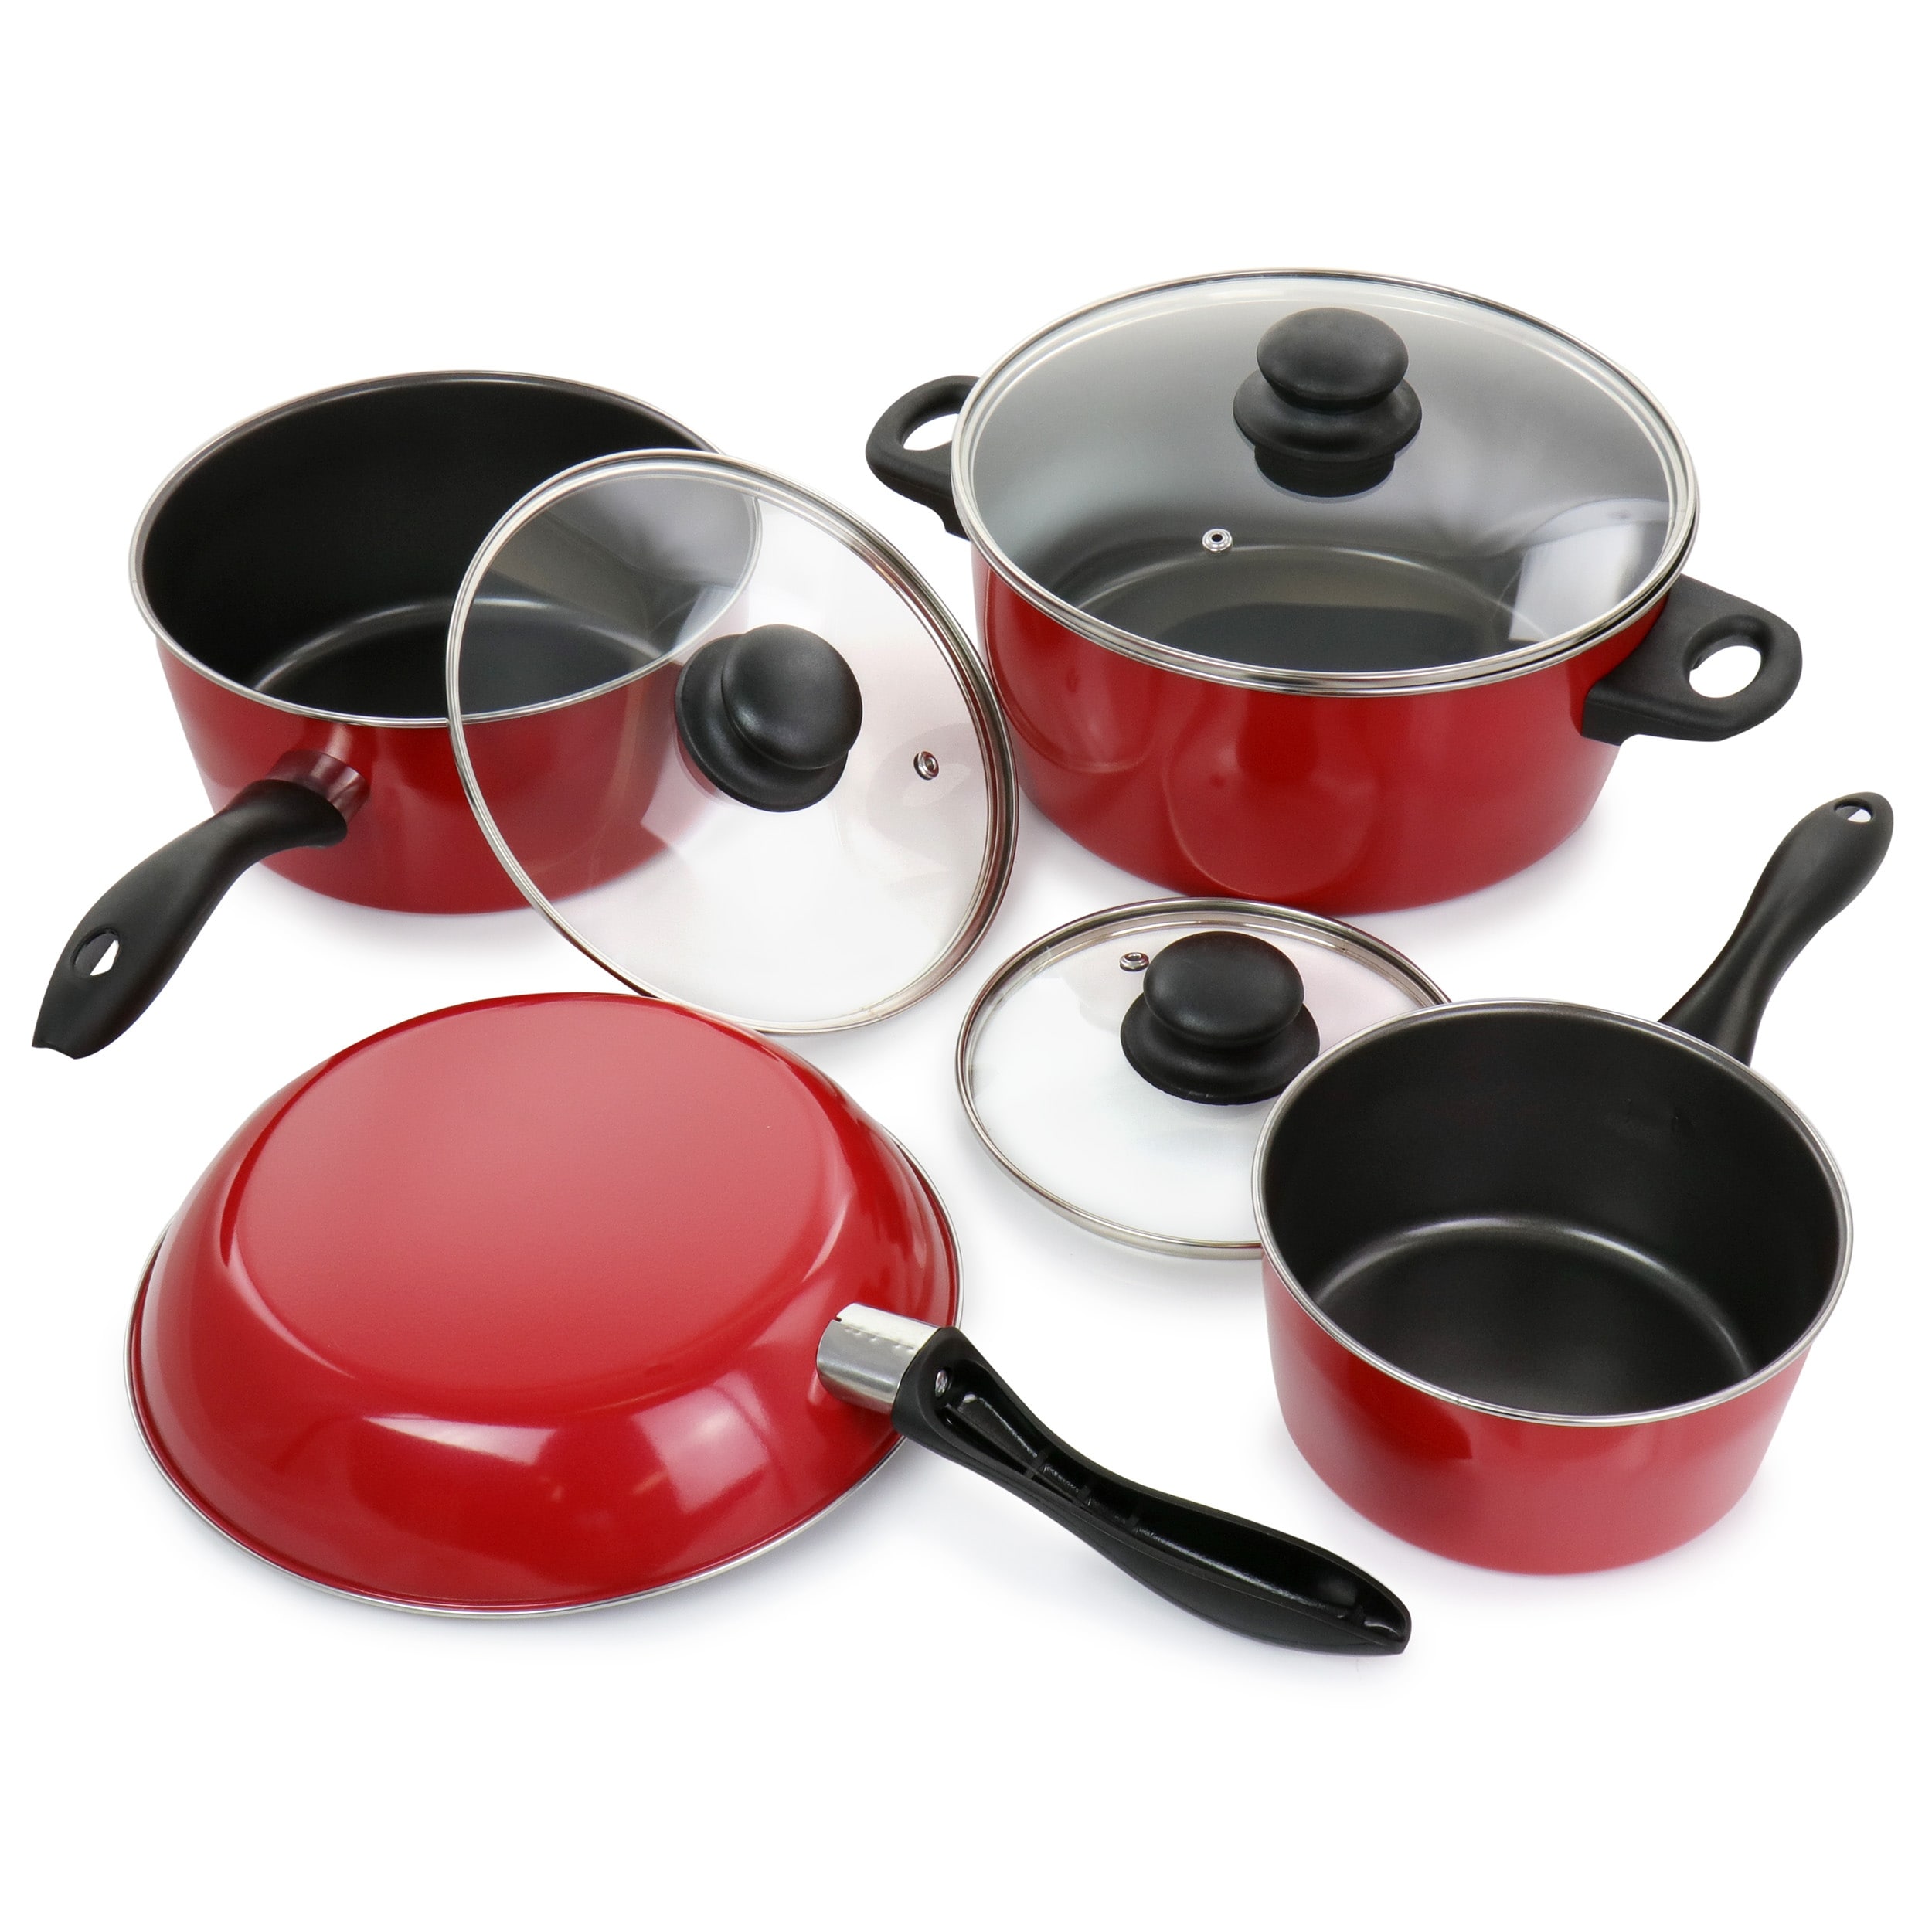 https://ak1.ostkcdn.com/images/products/is/images/direct/1e3662144f25c96d6a70dc053de7ebf2347db20b/Gibson-Home-Armada-7-Piece-Nonstick-Carbon-Steel-Cookware-Set-in-Red.jpg